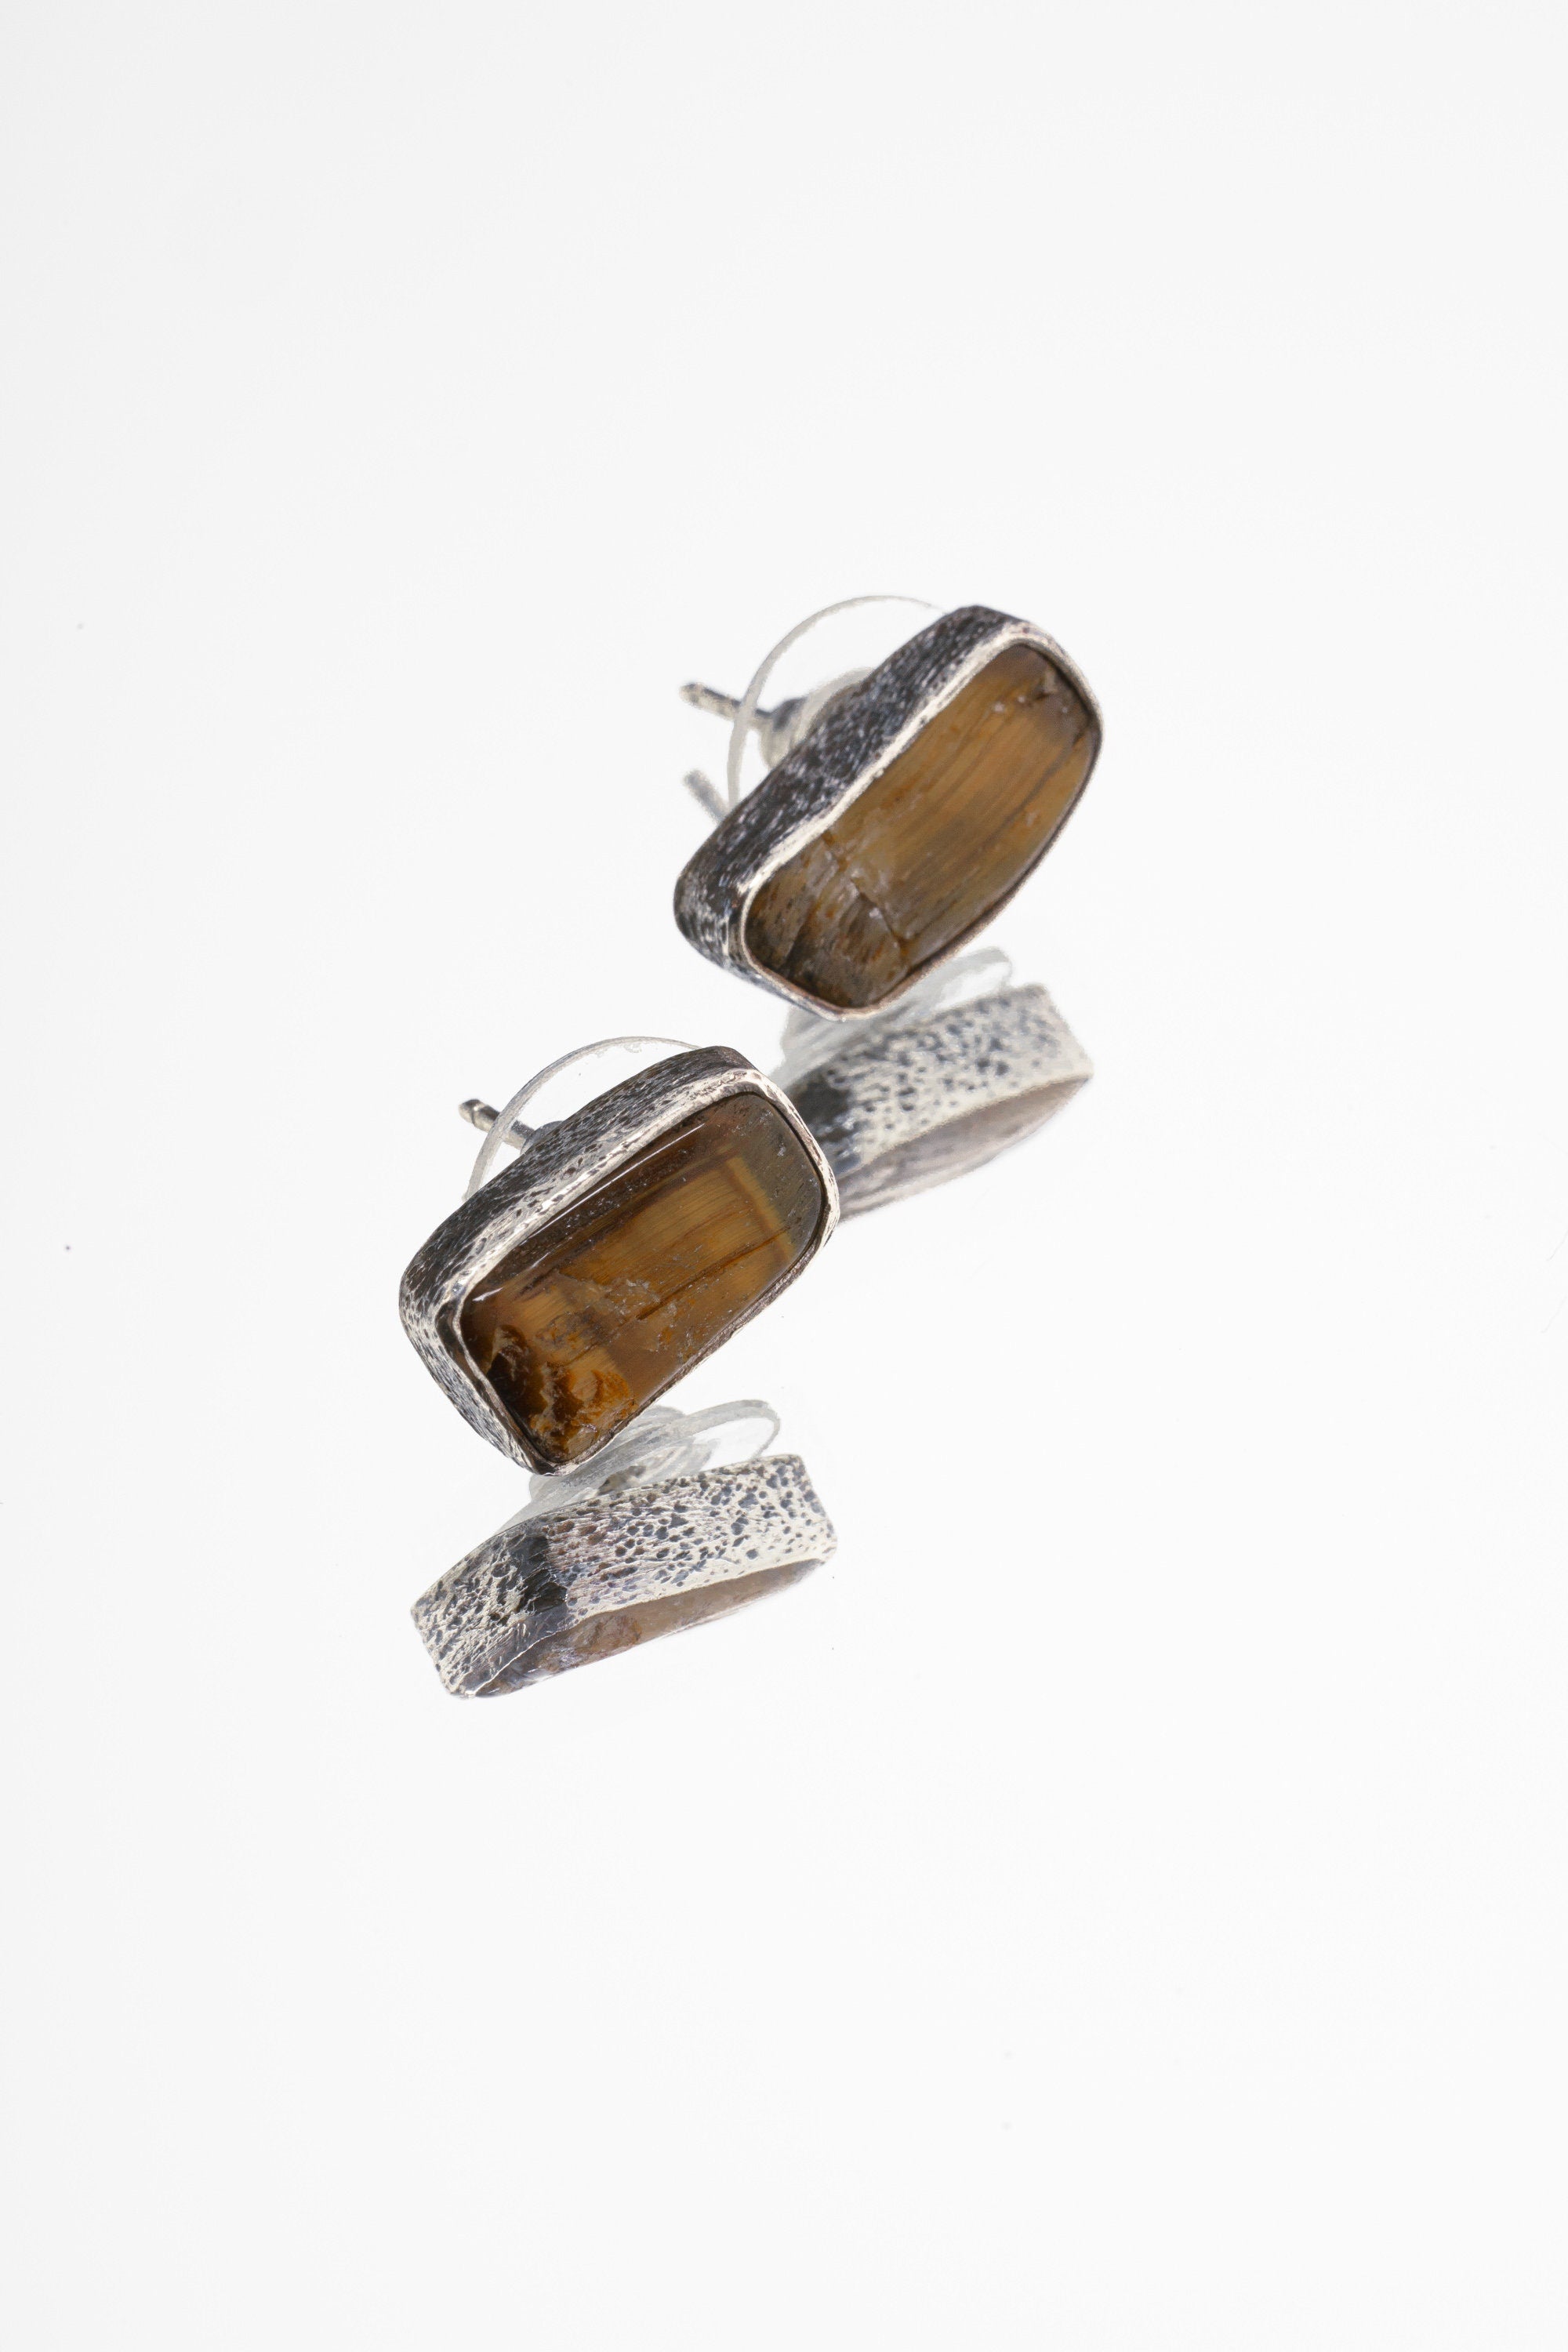 Tigers Eye Stud - Textured Finish - organic shaped Pair- Sterling Silver - Freeform Earring Studs